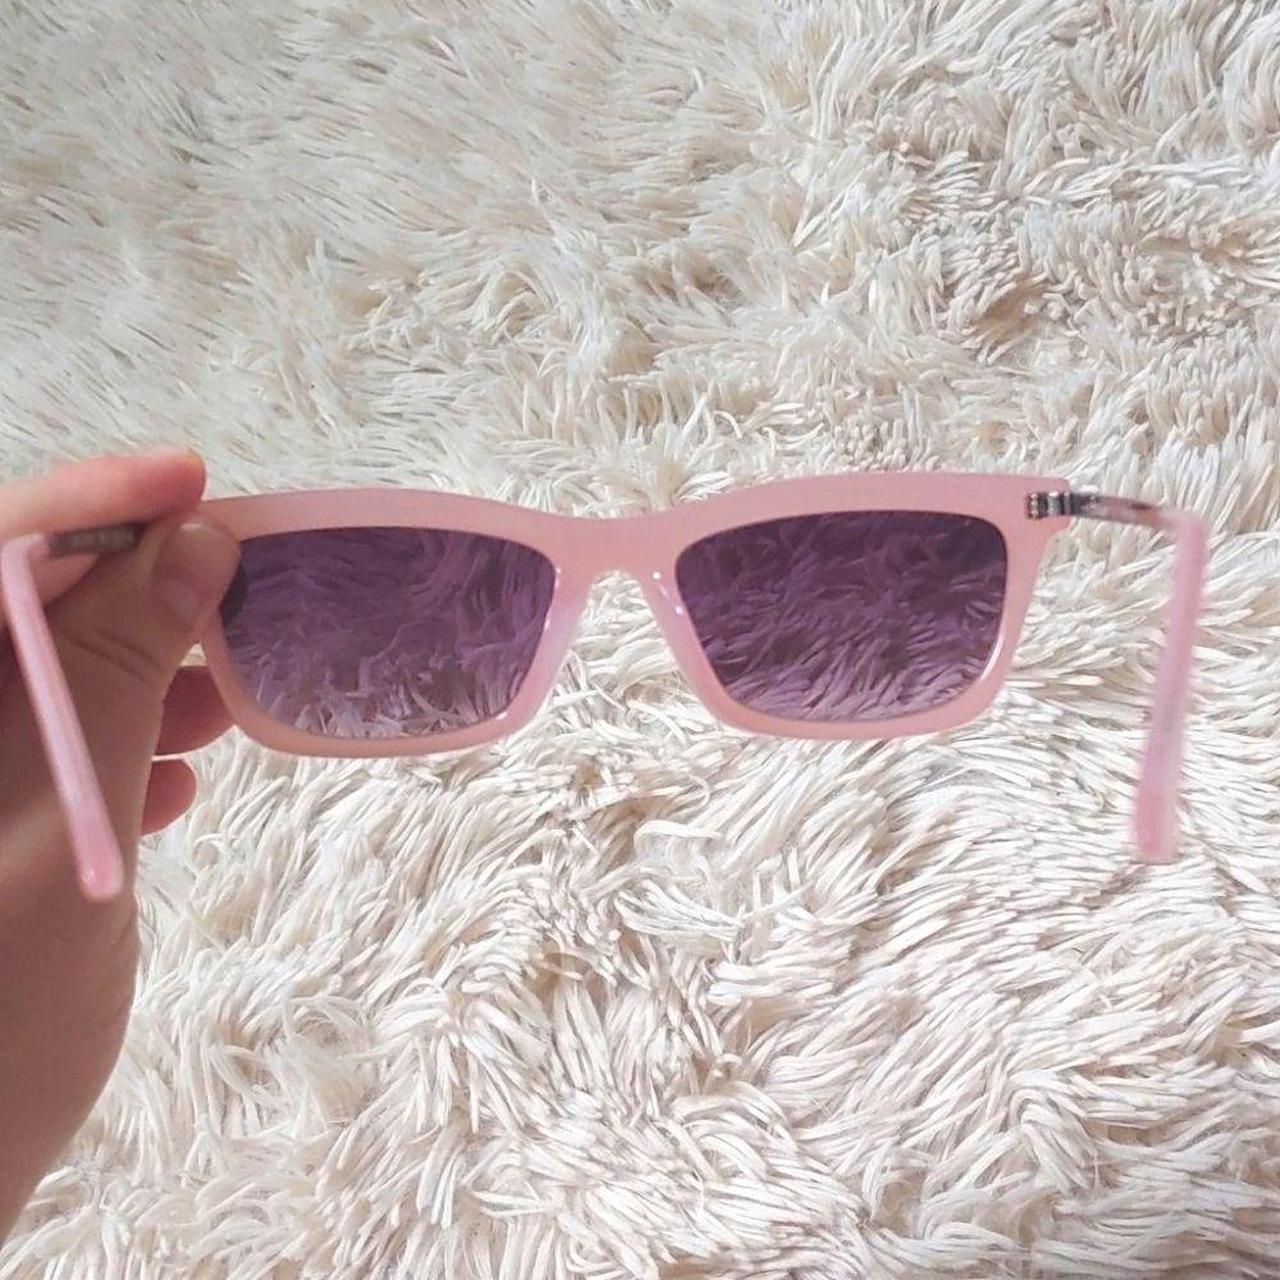 Product Image 2 - A.J. Morgan sunglasses!

Pink frames with